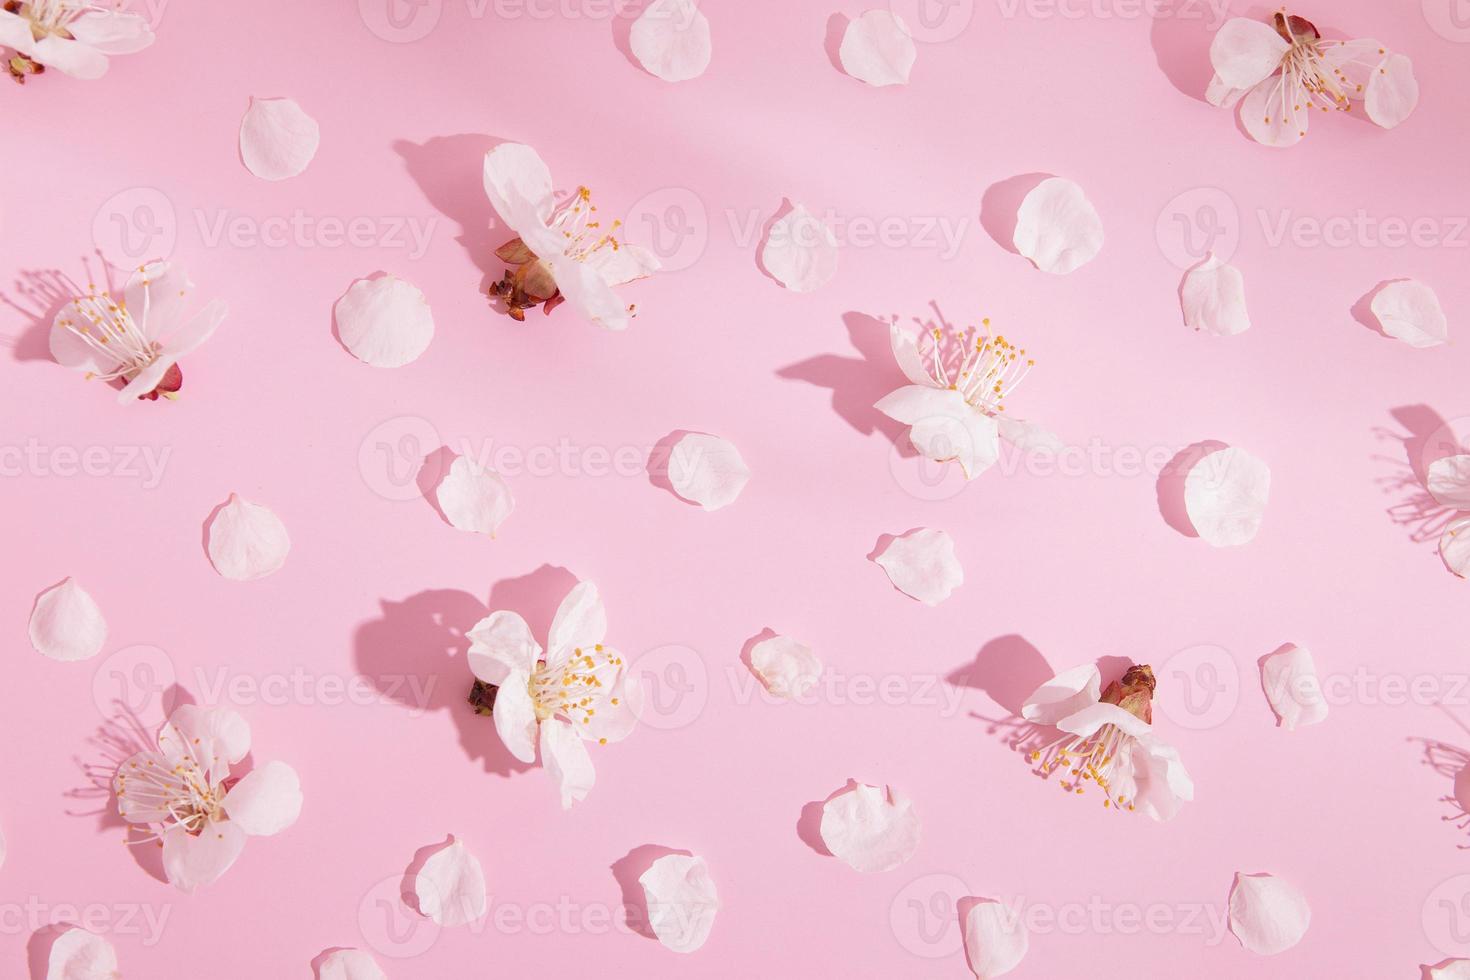 Top view white flowers and petals on pink background with hard shadows. Spring blossom pattern photo